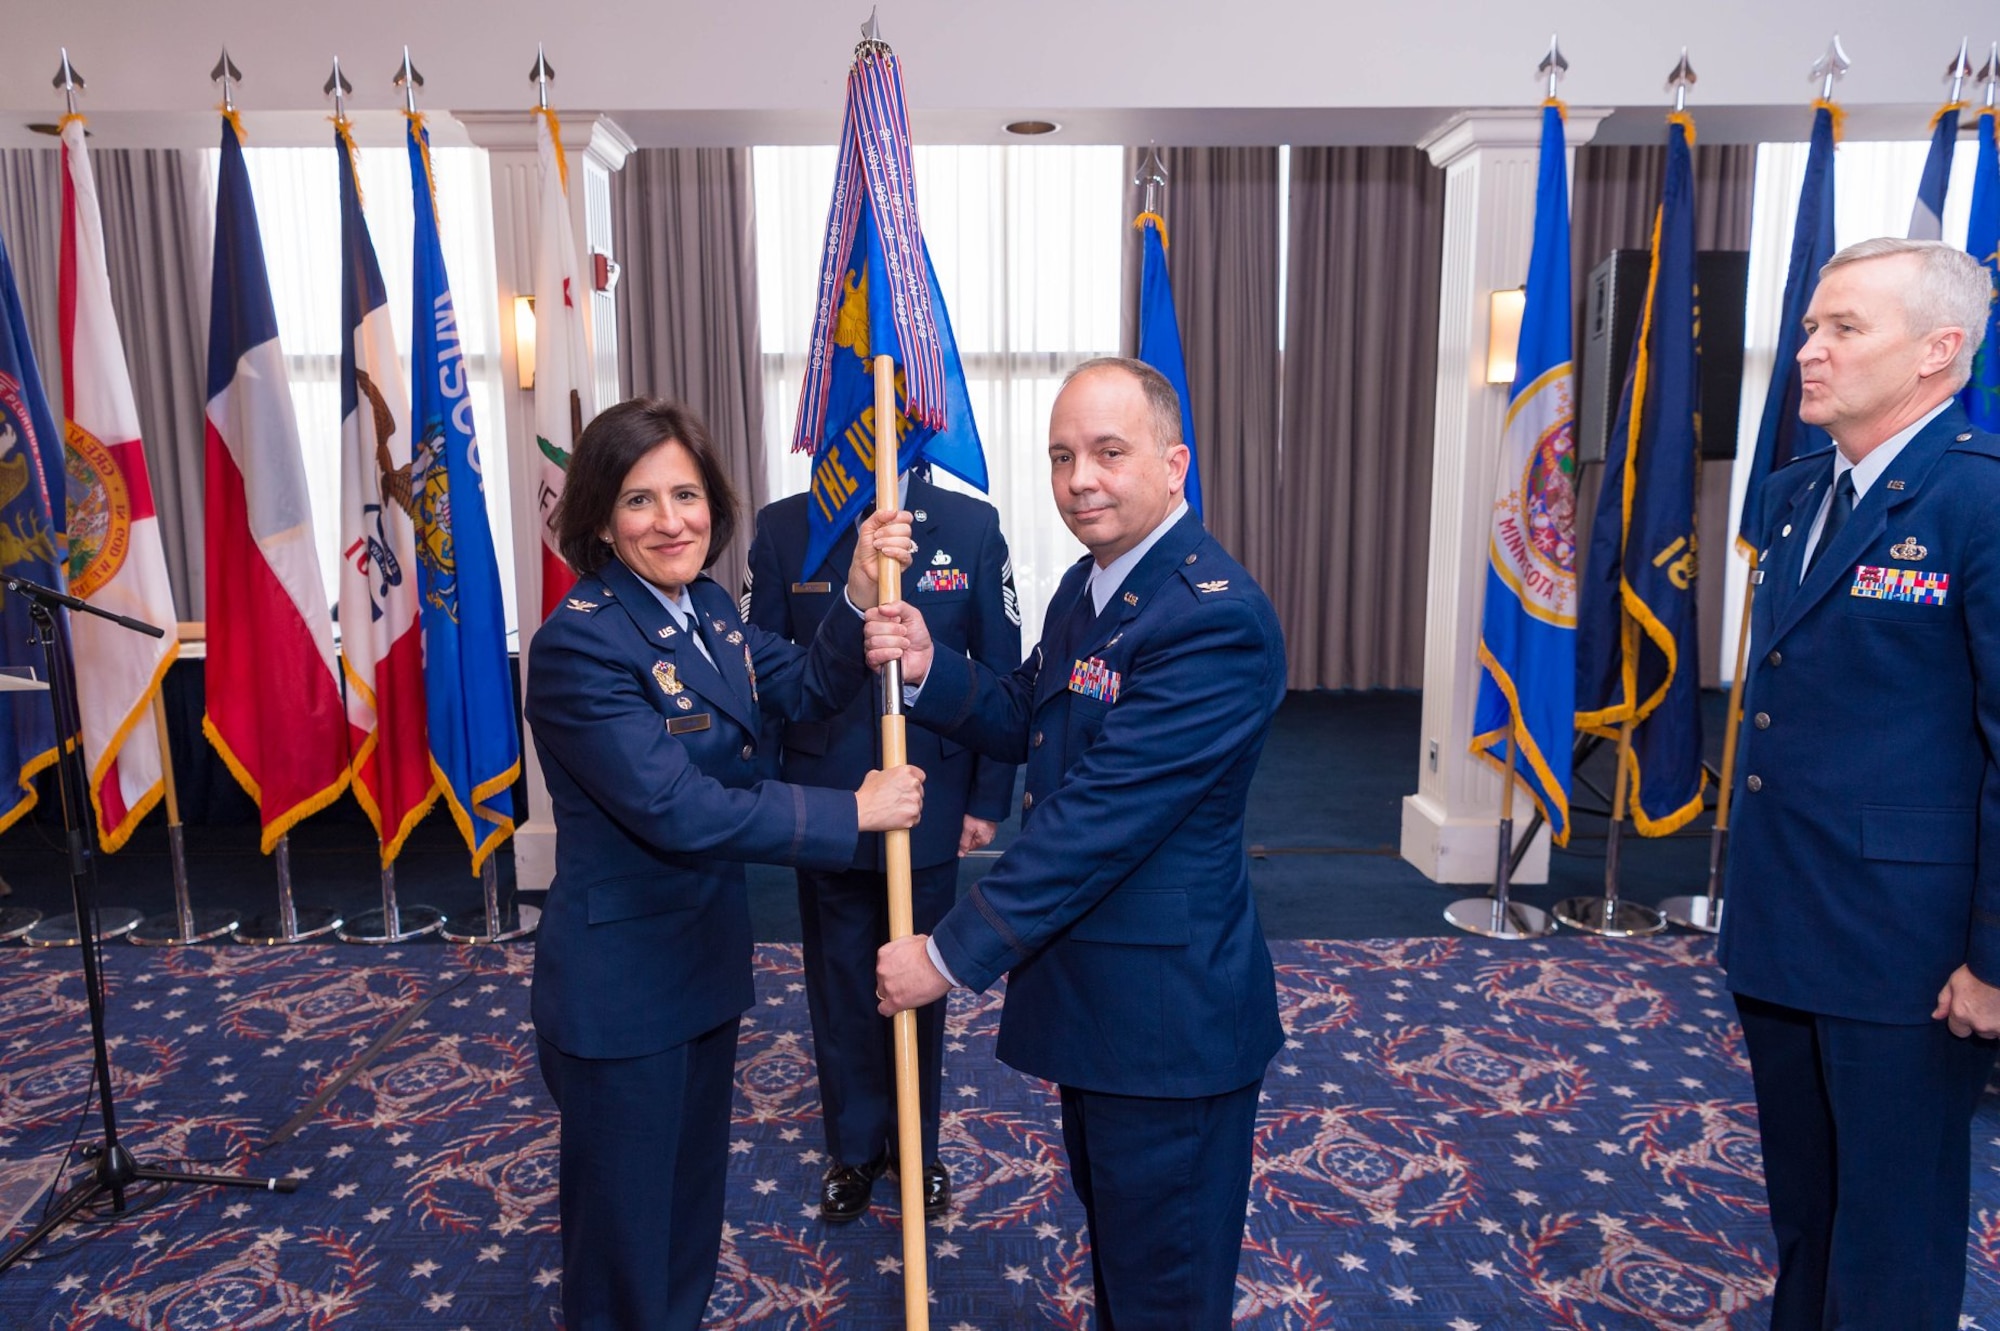 Col. Don Schofield as he takes command of The United States Air Force Band in a ceremony at Joint Base Anacostia-Bolling, Washington D.C., on Jan. 15, 2019.